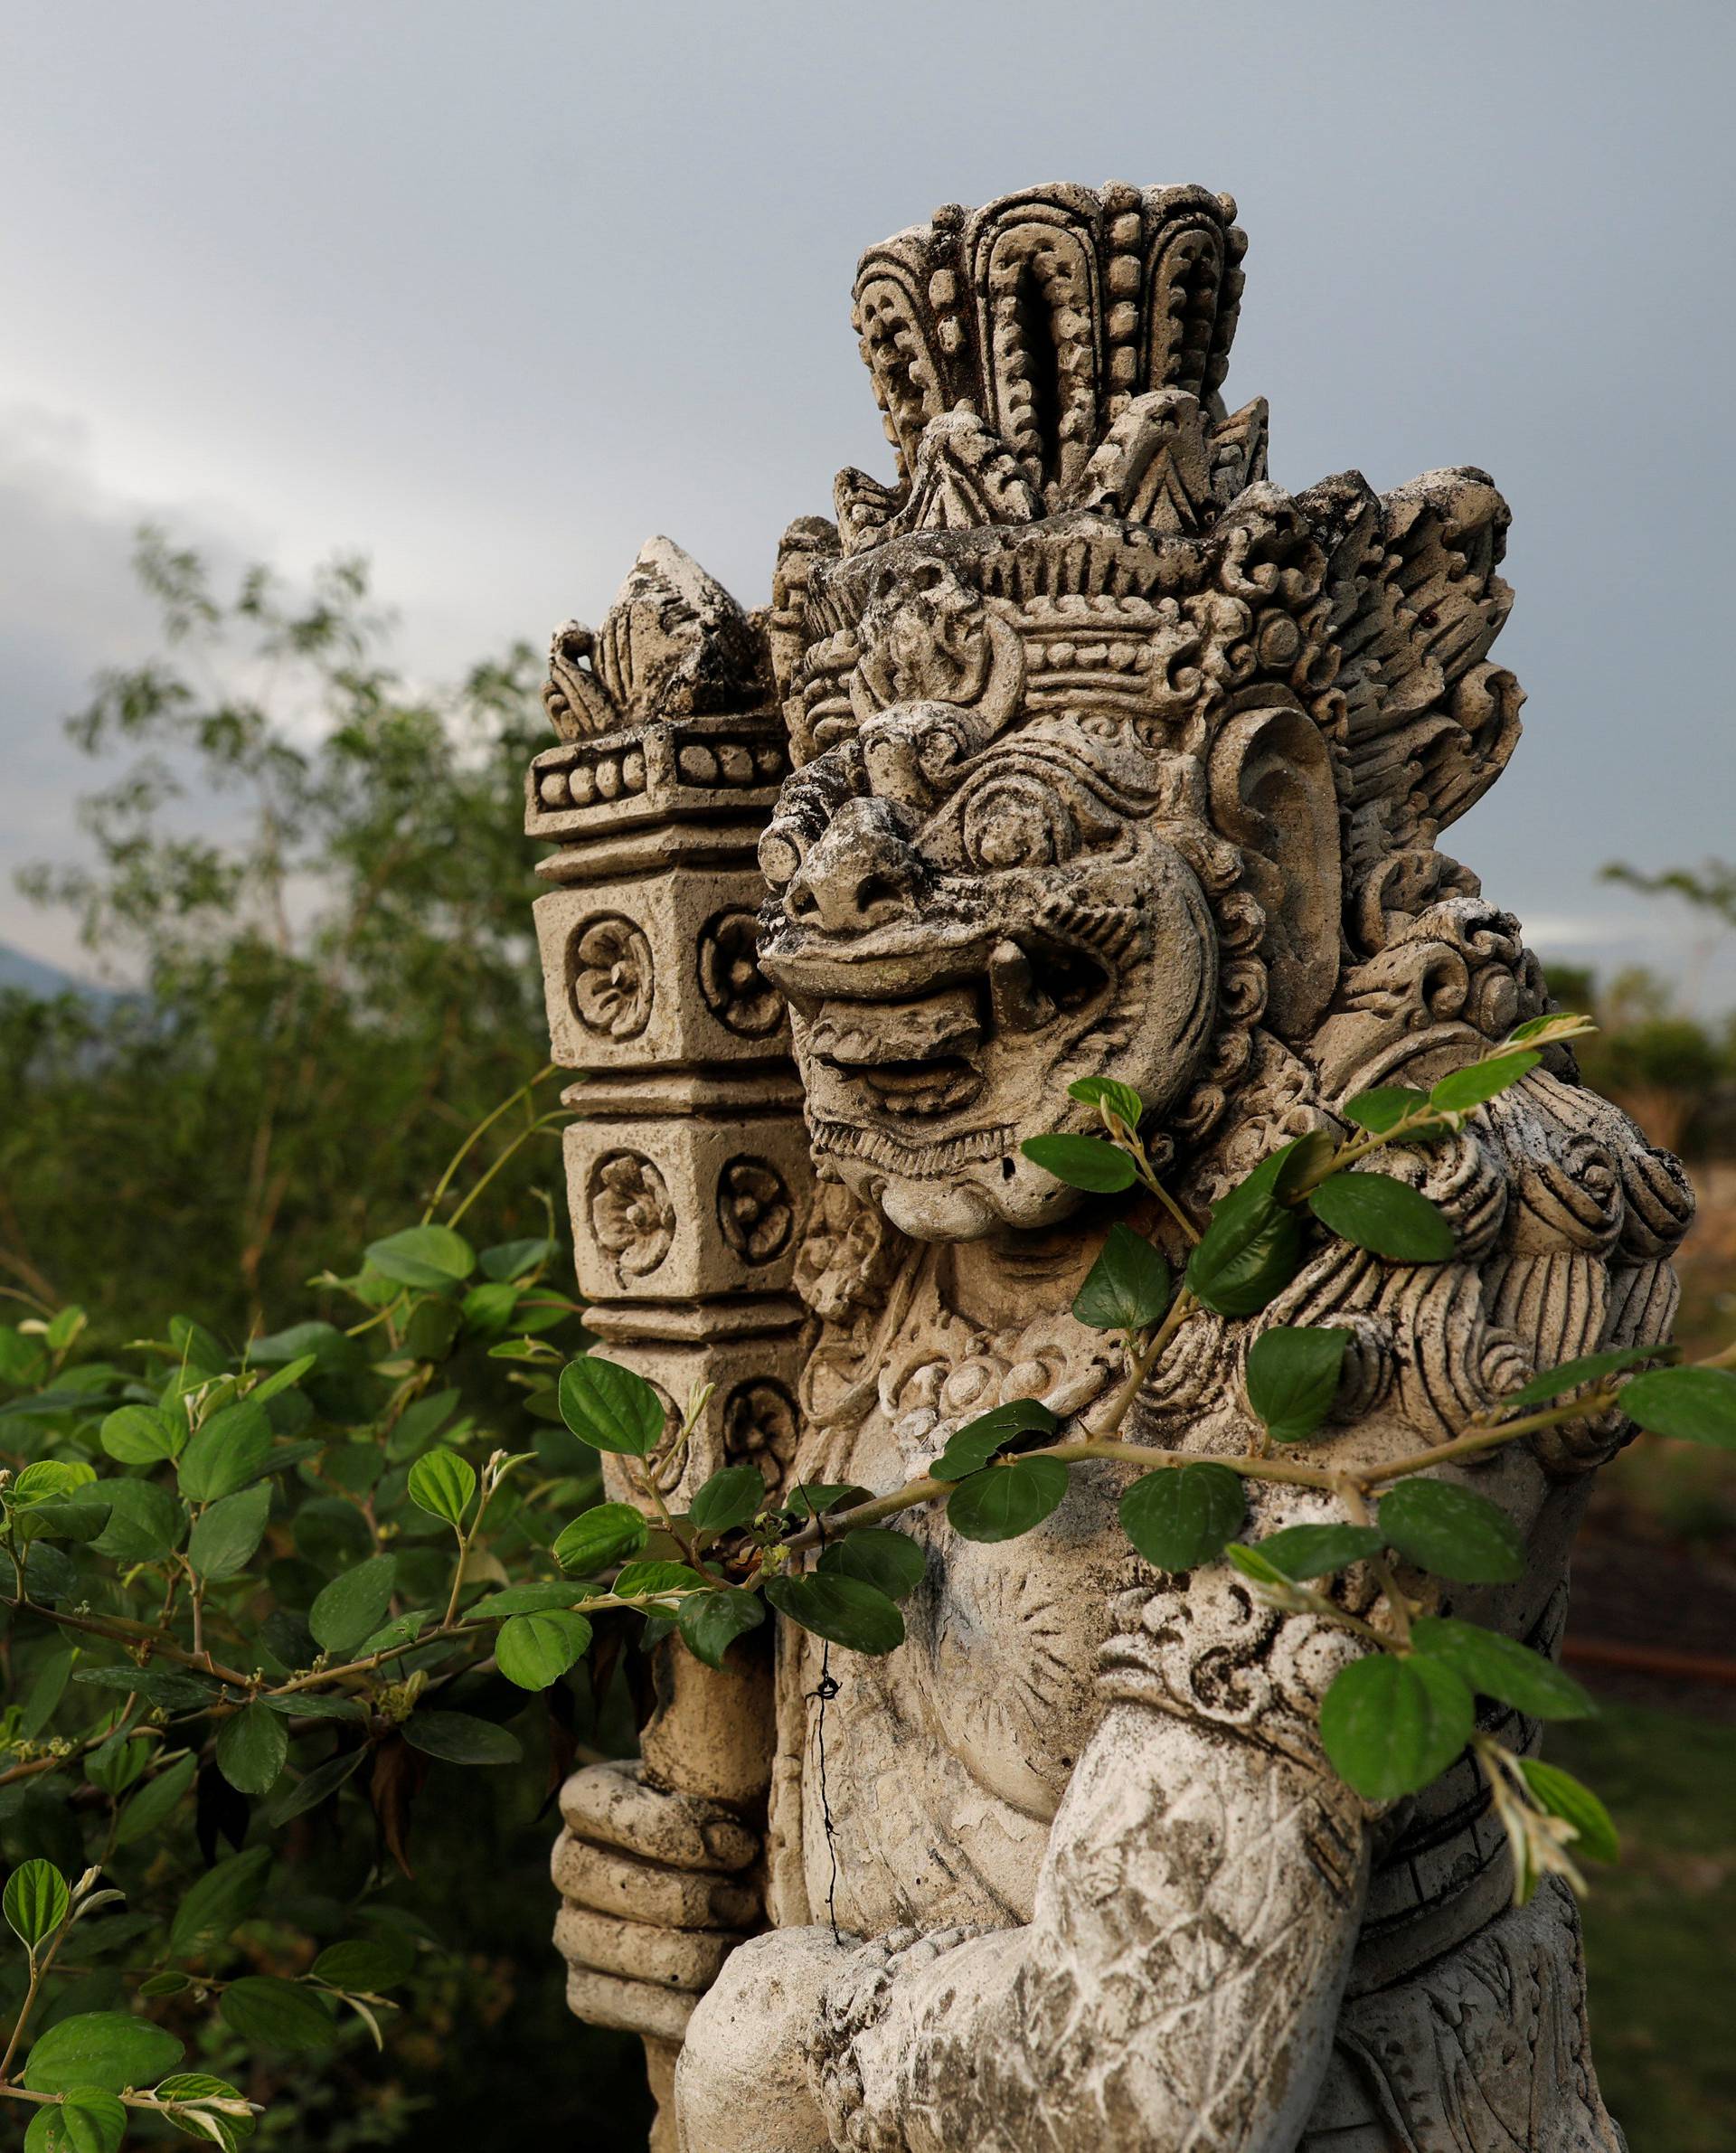 A statue on a bridge is seen as Mount Agung volcano erupts in the background near Kubu in Bali